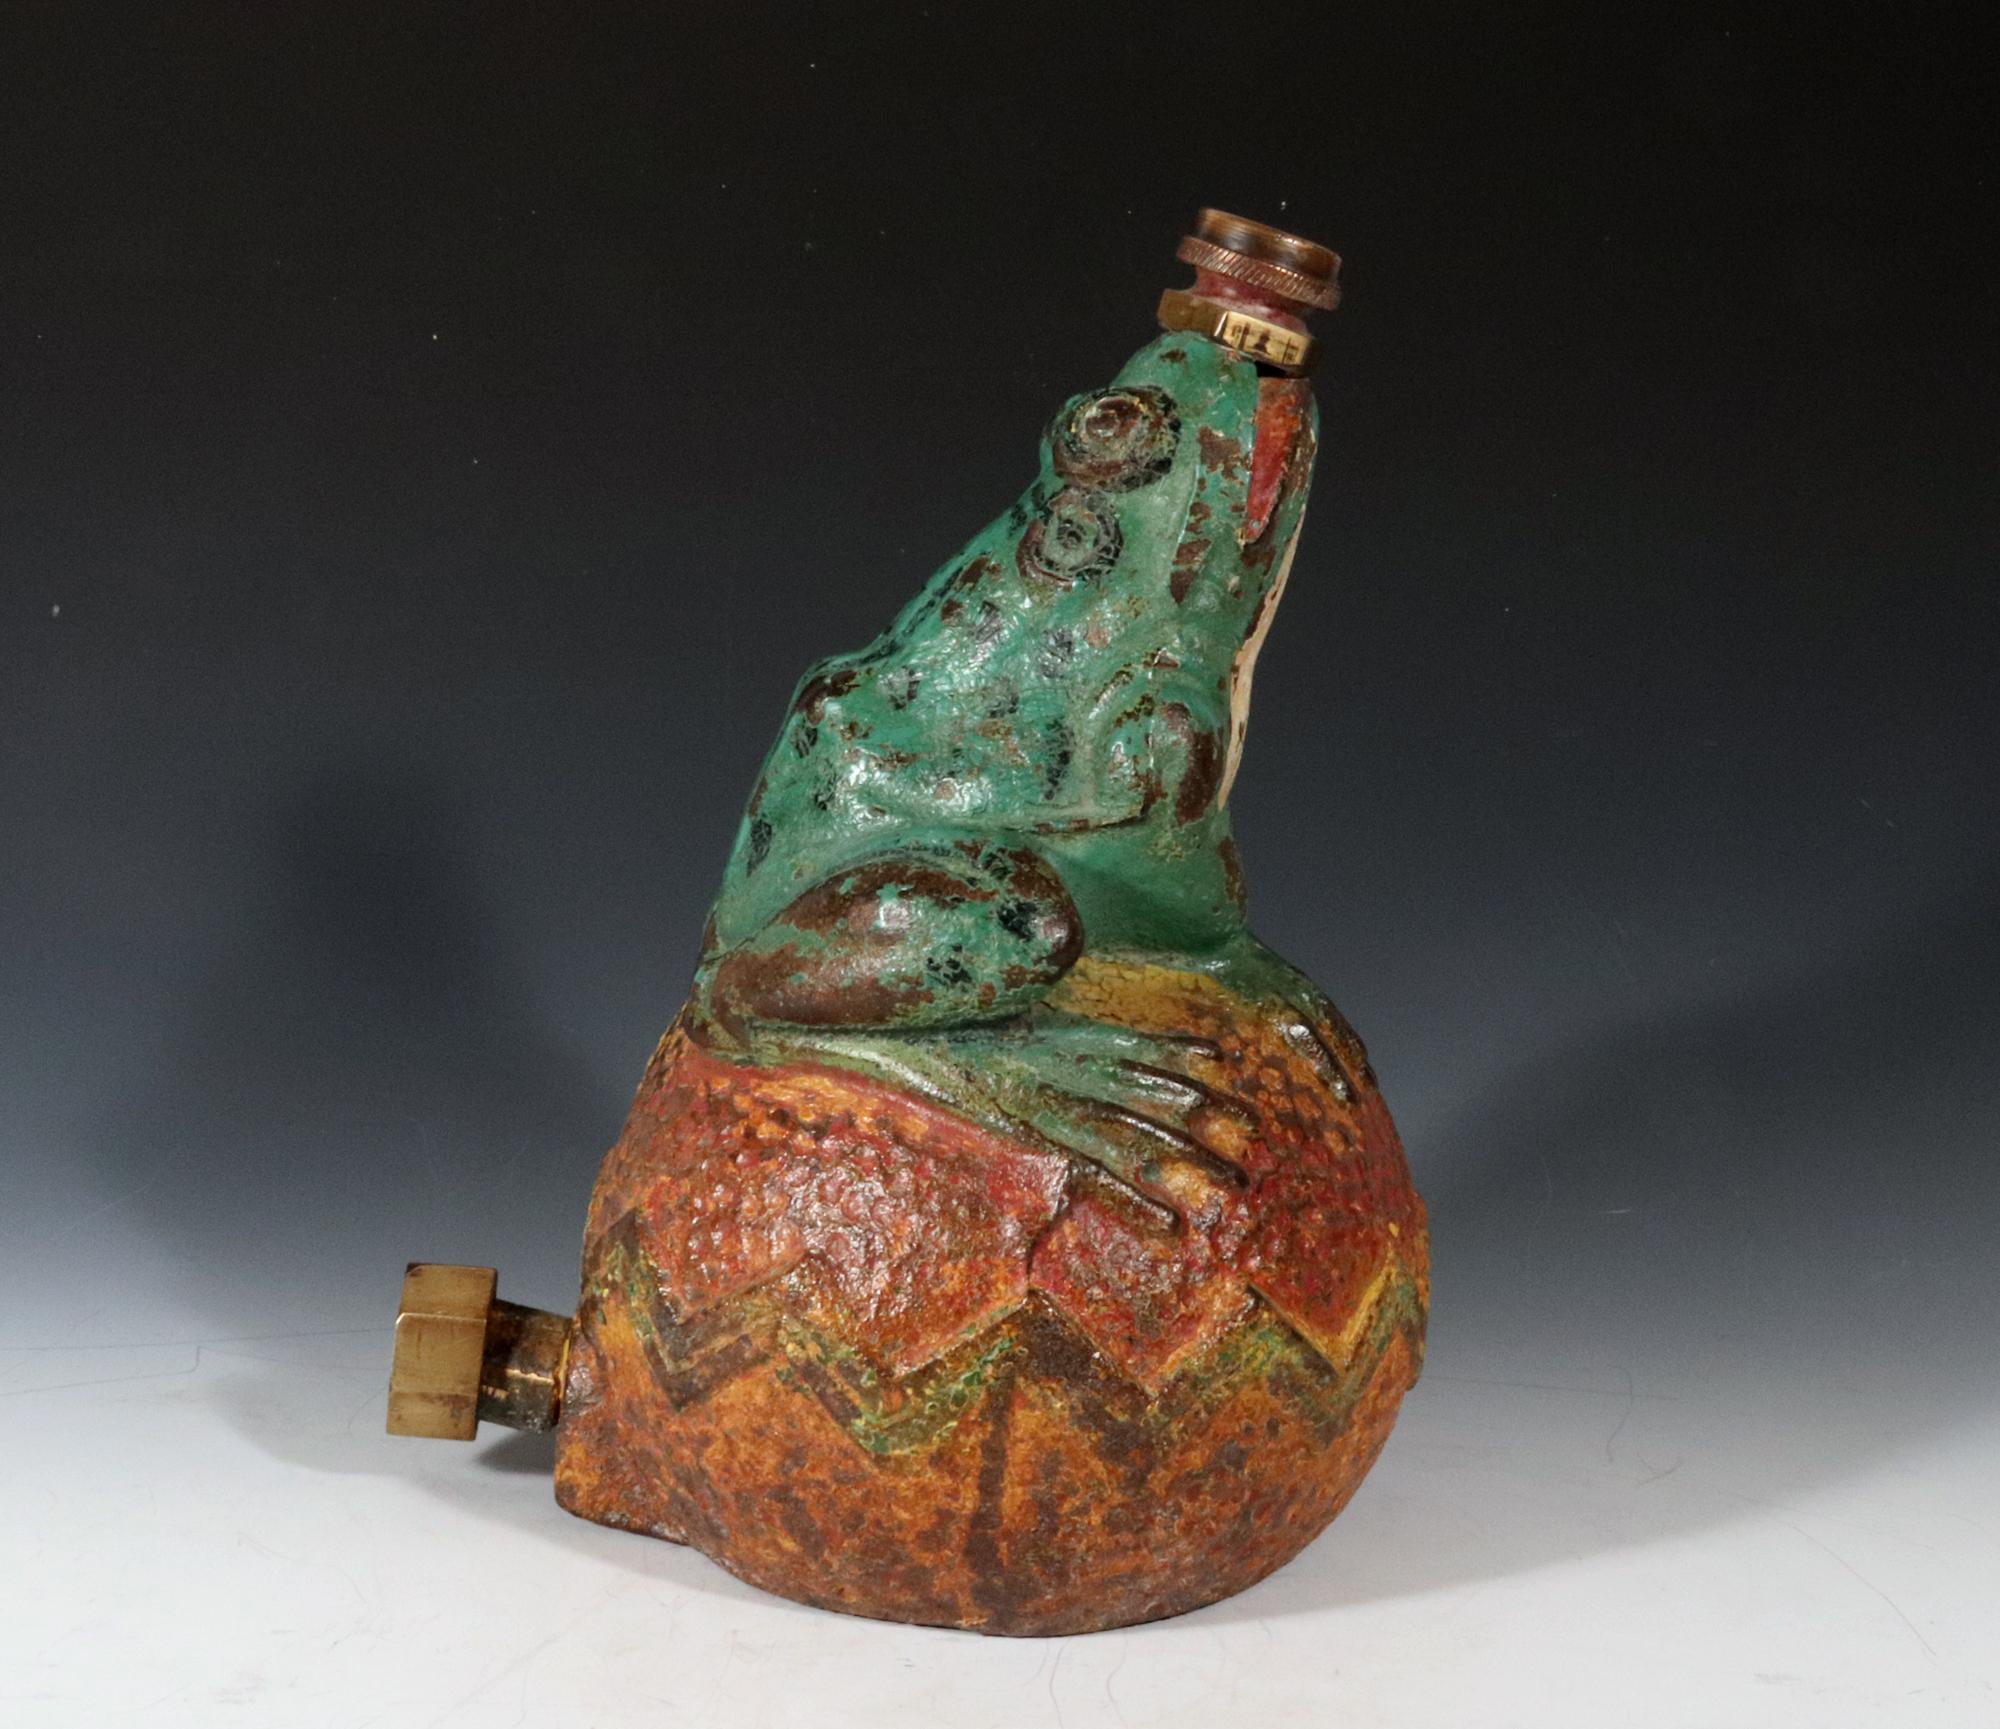 Vintage Lawn Sprinkler,
A Frog on a Ball,
Nuydea Foundry
1920s-30s

The working lawn sprinkler is in the form of a green frog sitting on a ball with a zig-zag design around the circumference. It has brass fitting to the mouth and the back